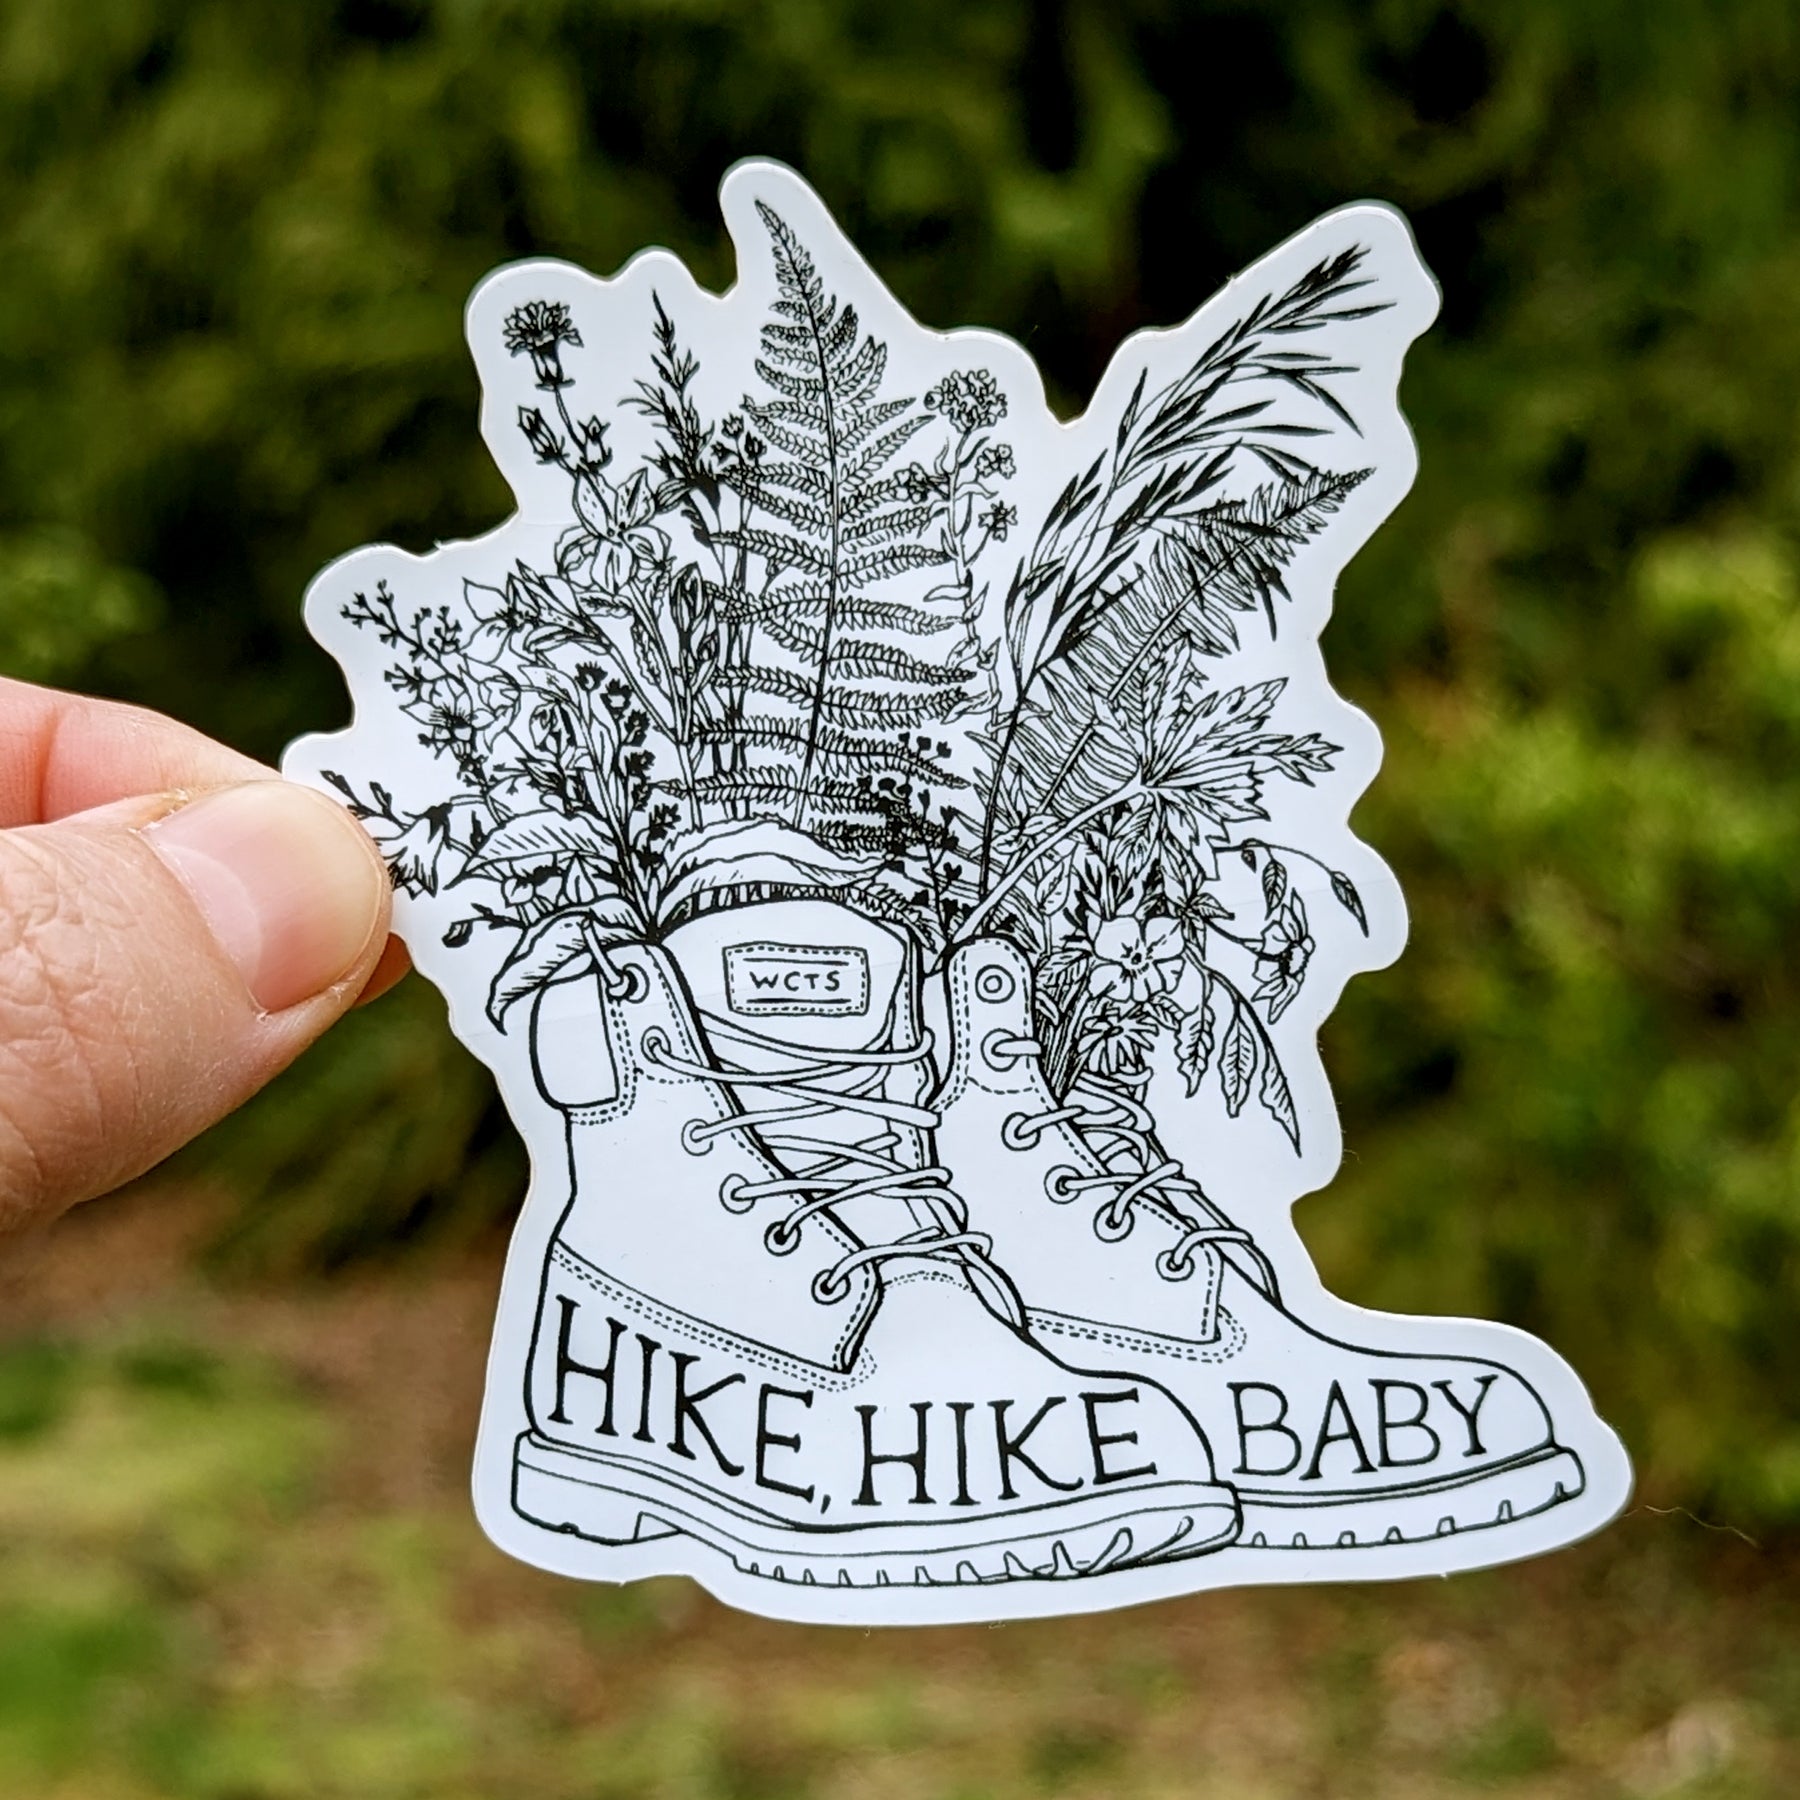 Westcoastees Hike Hike Baby Sticker - Westcoastees Hike Hike Baby Sticker -  - House of Himwitsa Native Art Gallery and Gifts